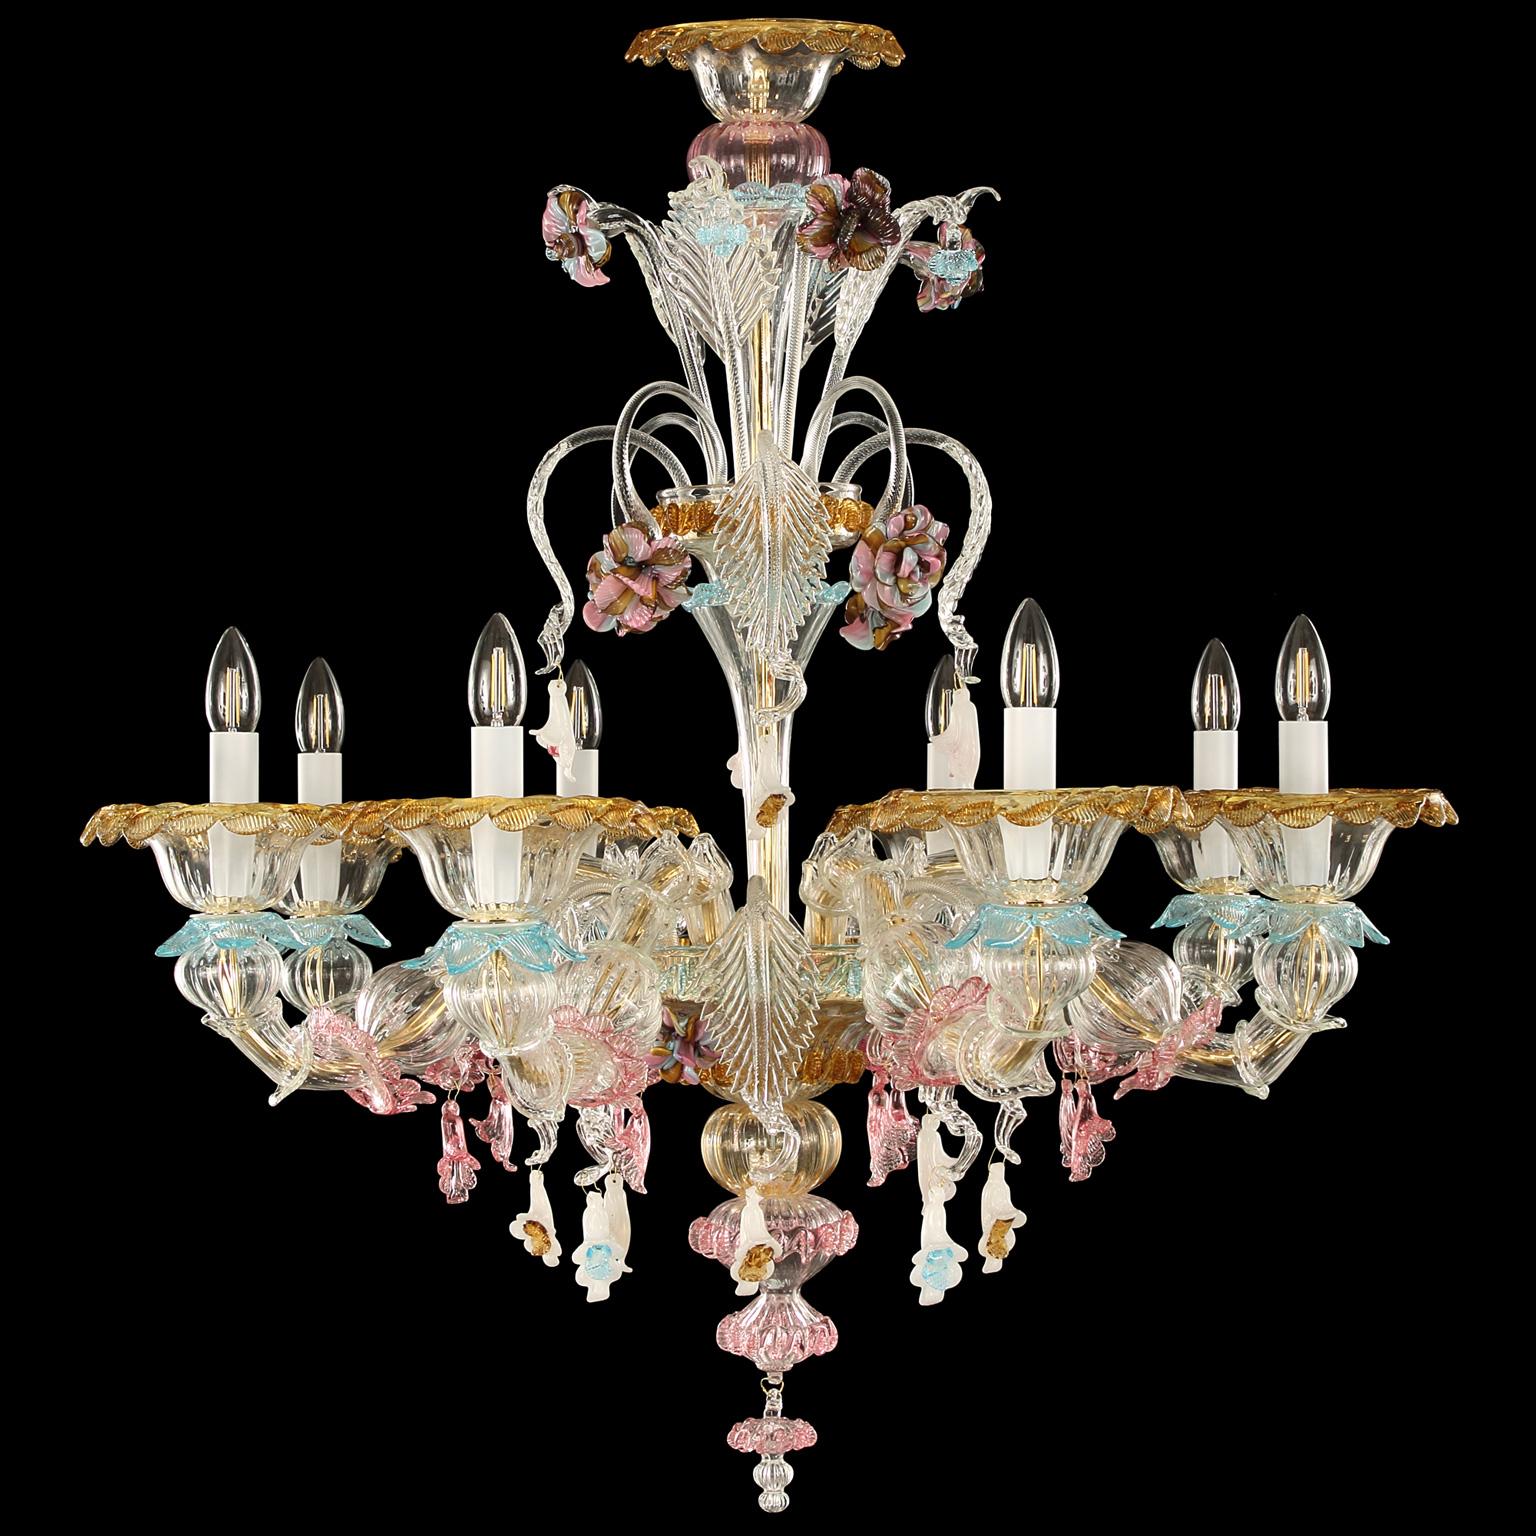 Toffee chandelier 8 arms, semi-rezzonico style, clear crystal Murano glass, multicolour details by Multiforme.

The artistic glass chandelier toffee is an elegant and delicate lighting work, colored with pastel tones. The structure is a combination